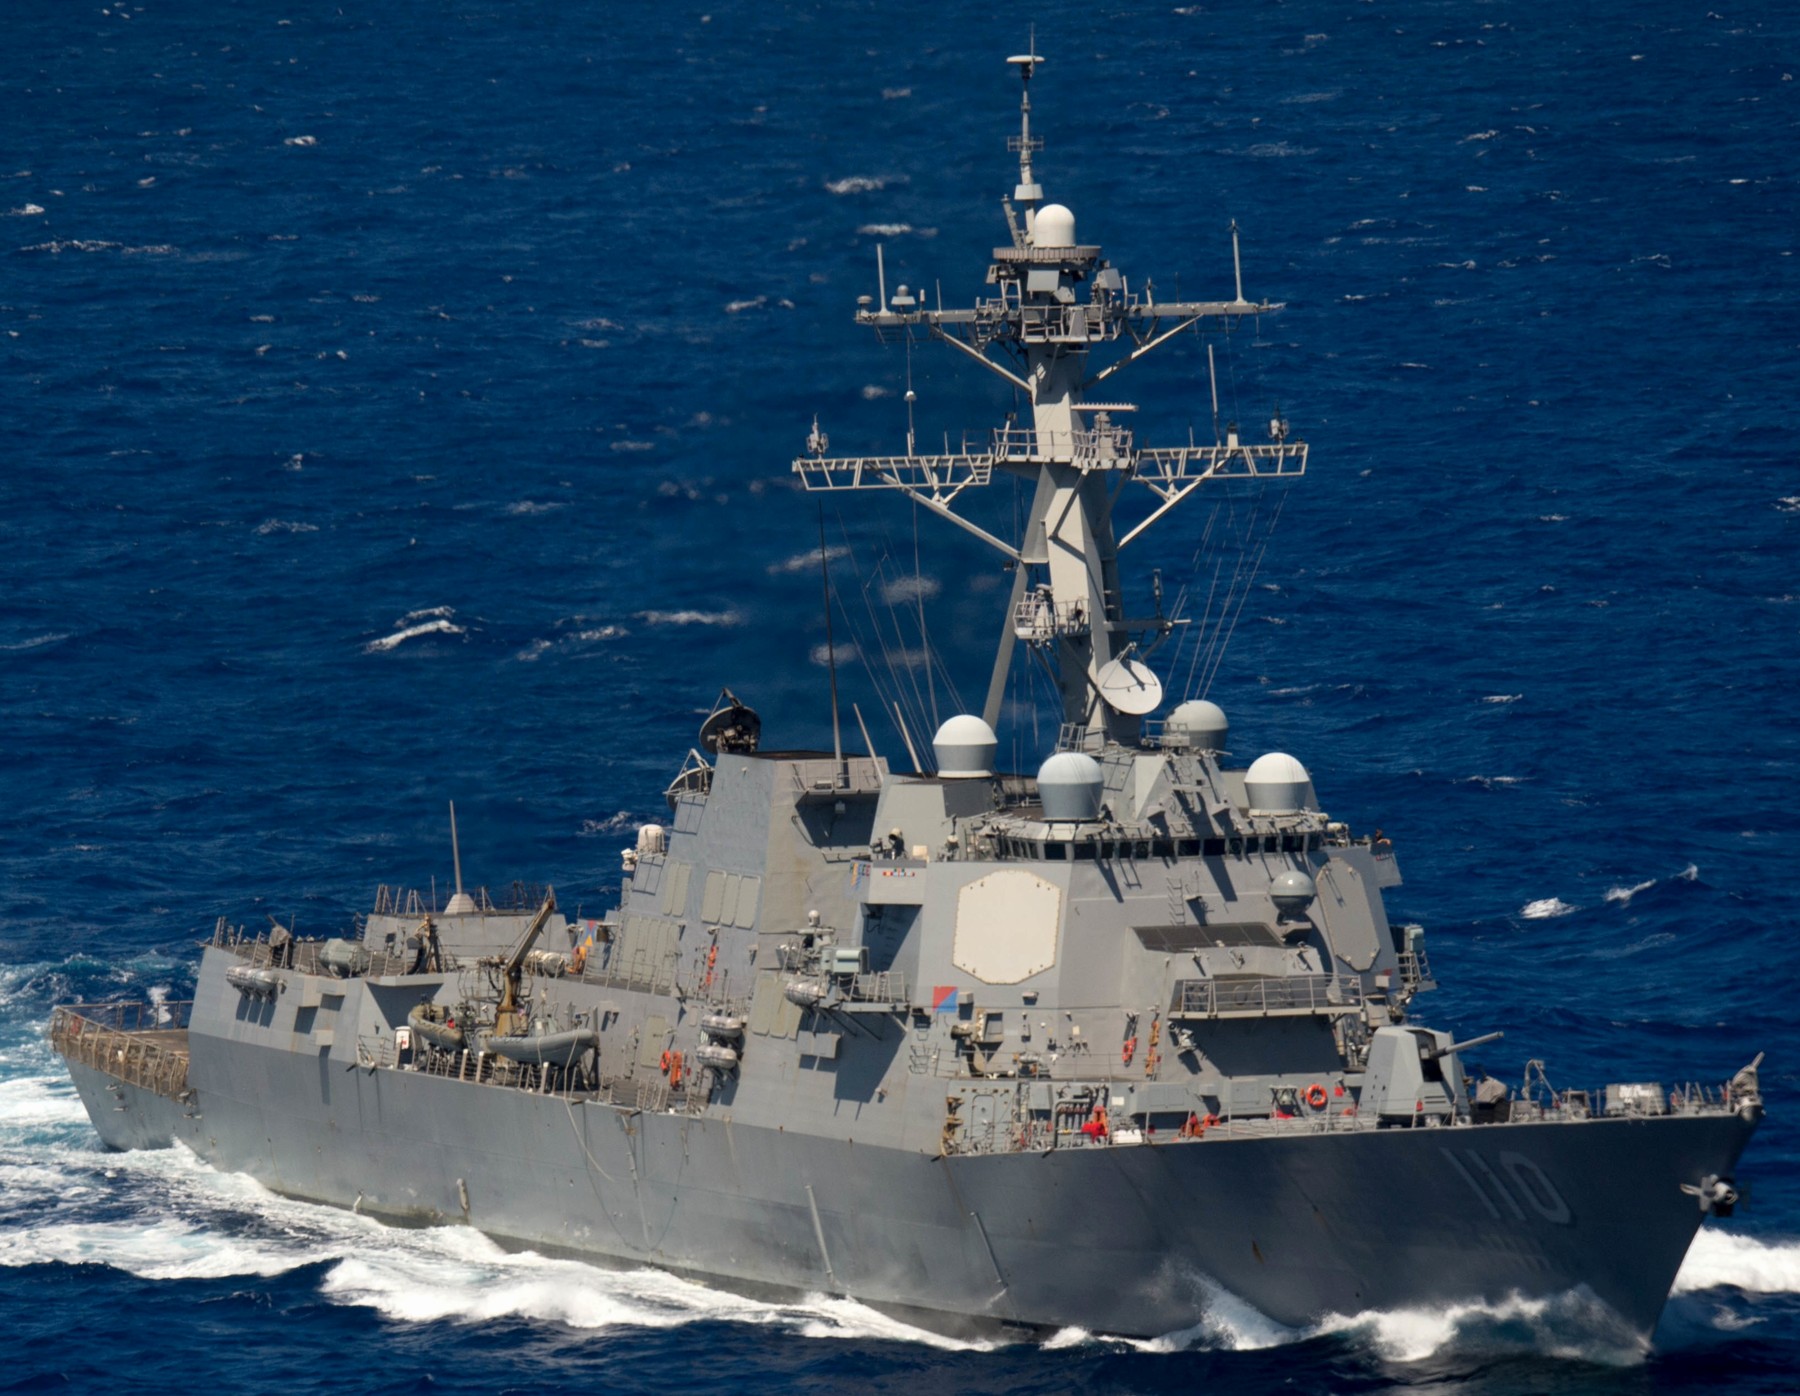 ddg-110 uss william p. lawrence arleigh burke class guided missile destroyer aegis us navy rimpac 16 28